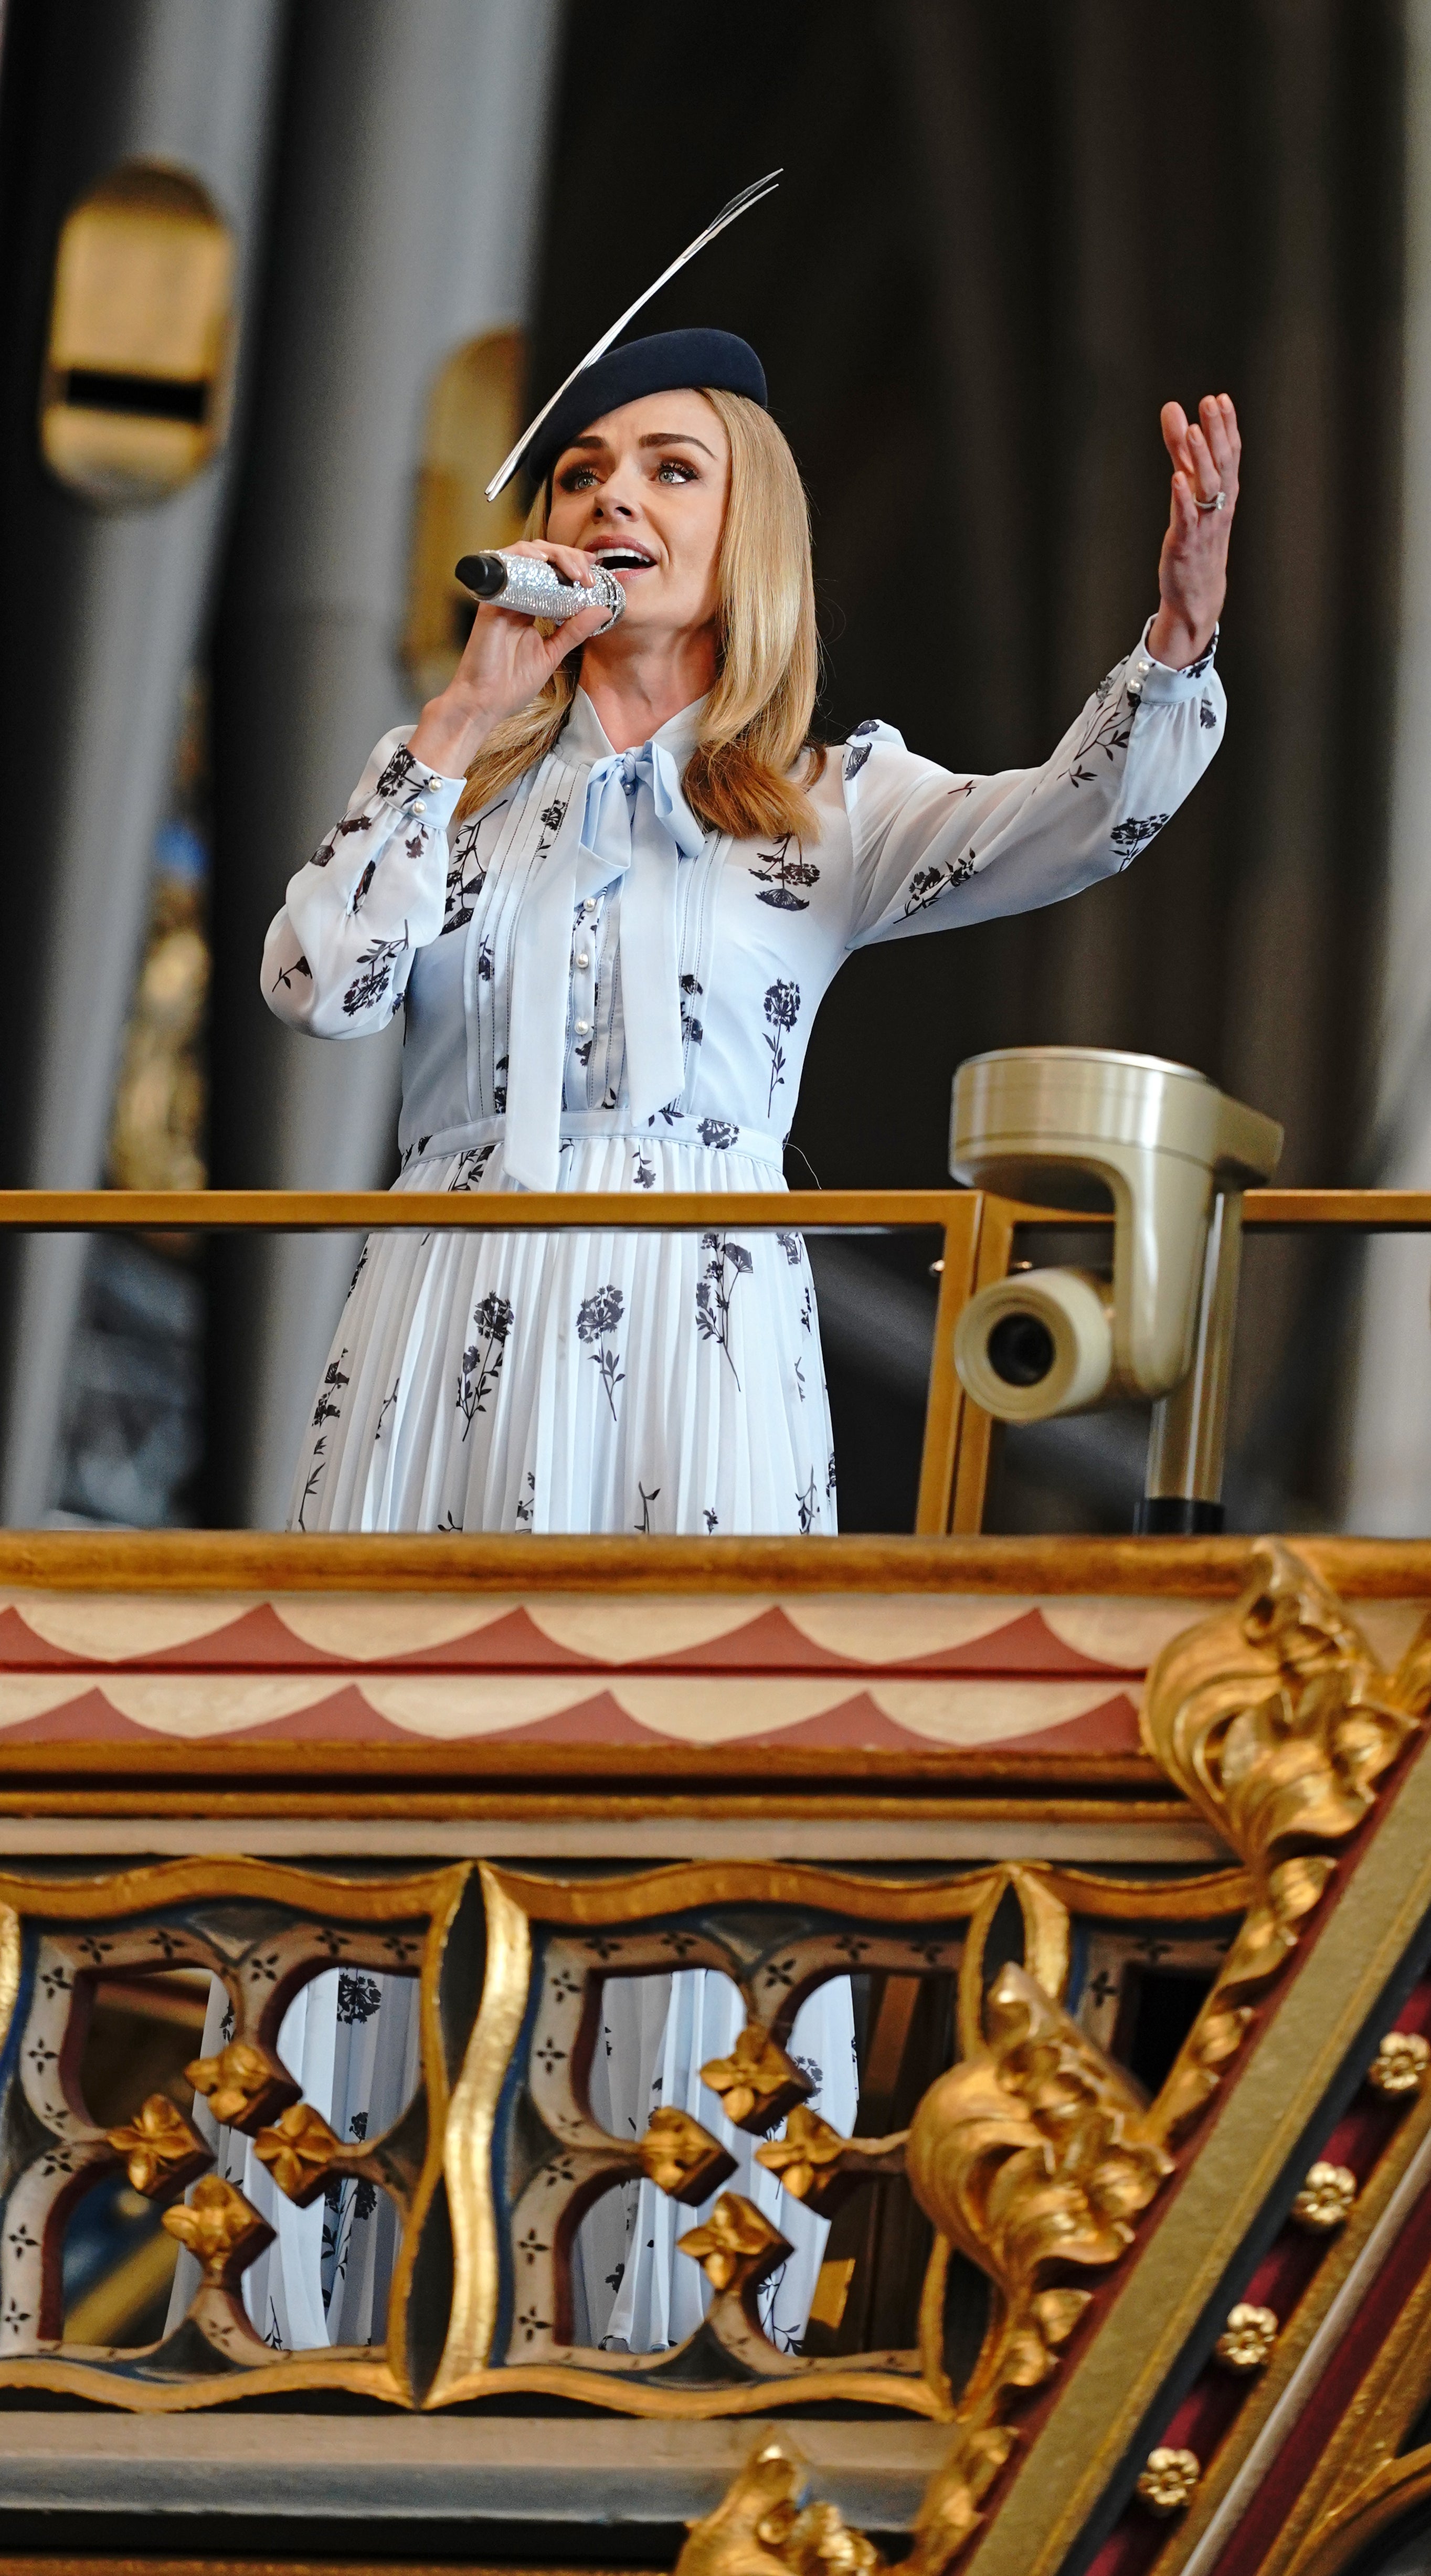 Katherine Jenkins performs We’ll Meet Again during the memorial service. (Yui Mok/PA)